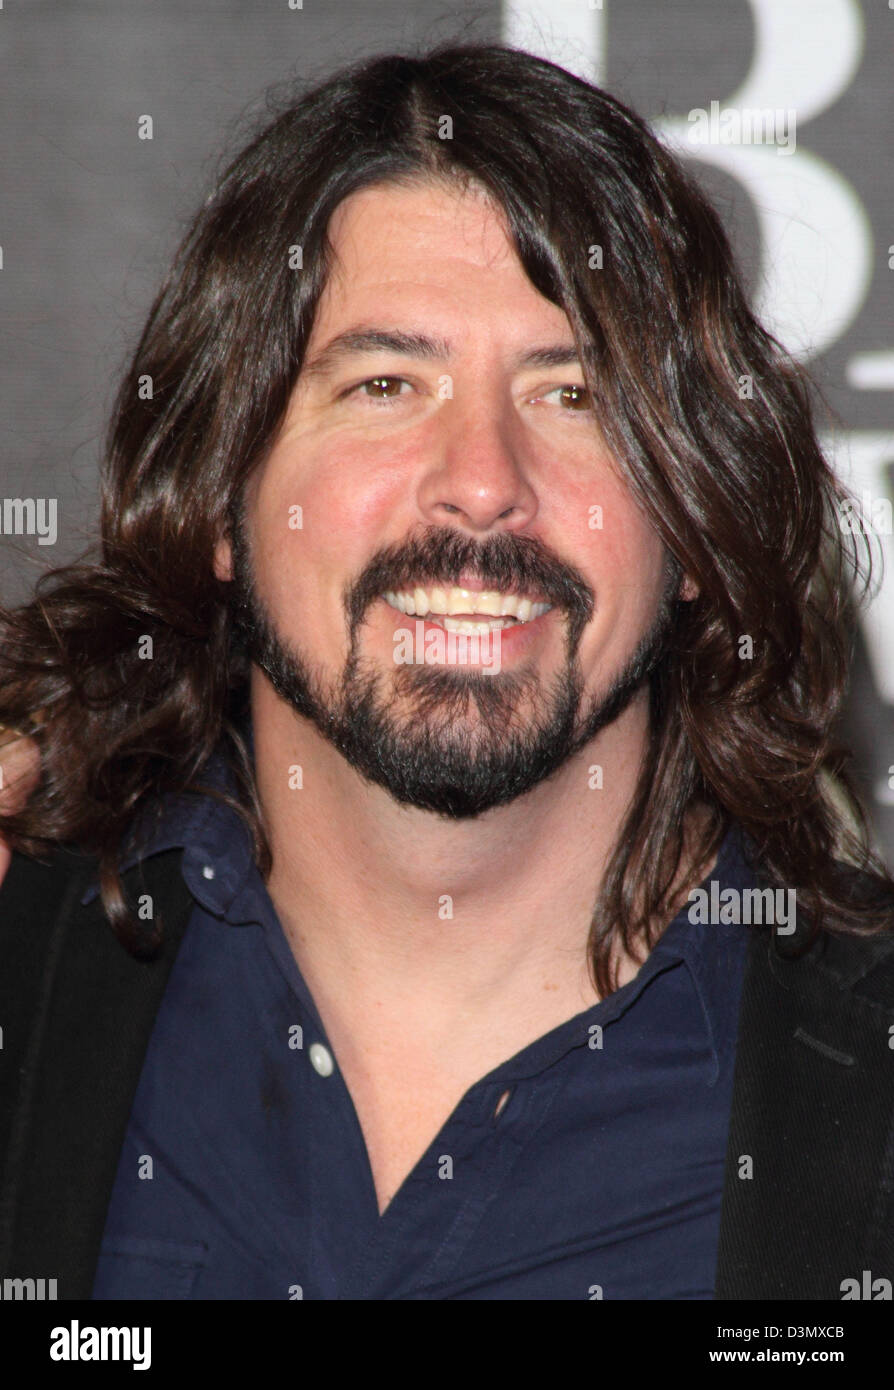 London, UK. 20th February 2013. Dave Grohl at the The 2013 Brit Awards at the O2 Arena, London - February 20th 2013  Photo by Keith Mayhew/ Alamy Live News Stock Photo